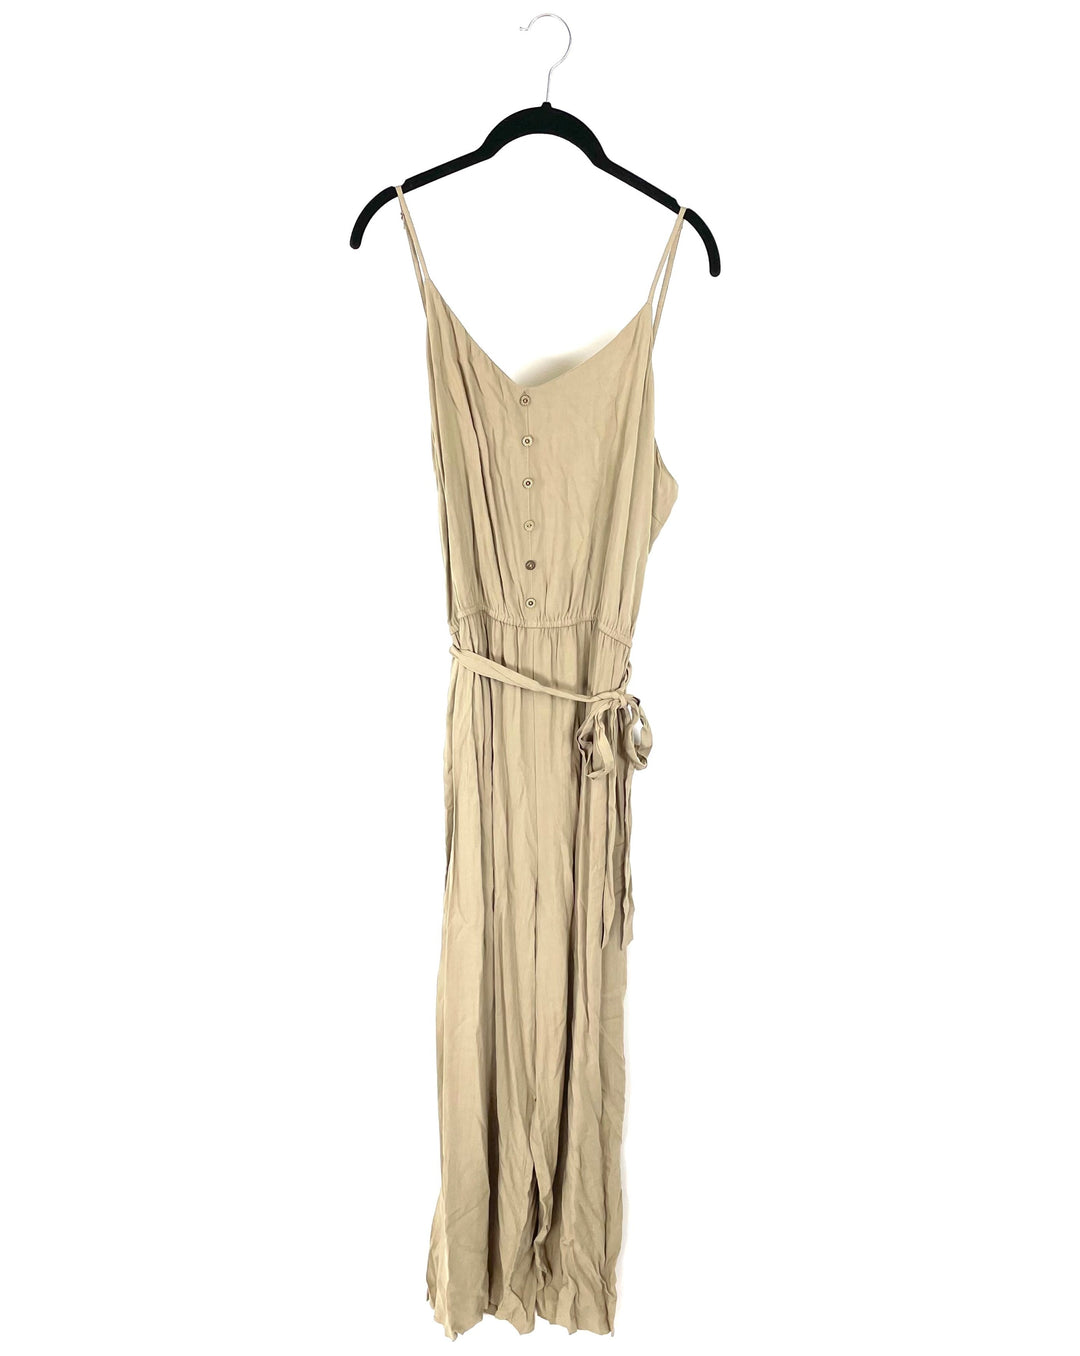 Beige Jumpsuit - Extra Large and 3XL